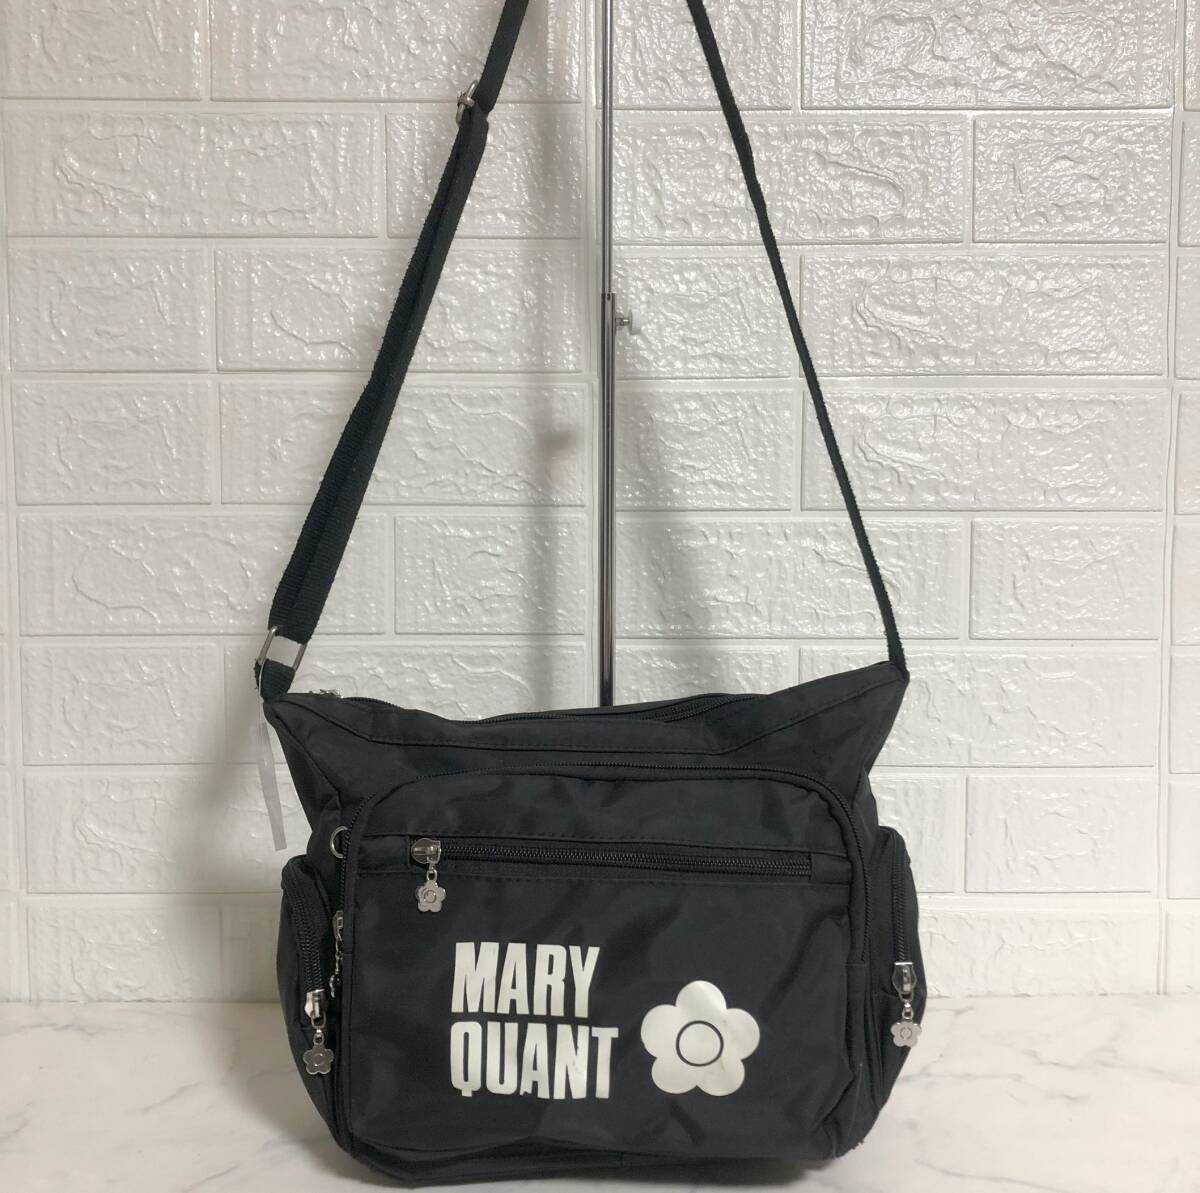 no21292 MARY QUANT マリークワント ナイロン 斜め掛けショルダー バッグ ポシェット ☆_画像1